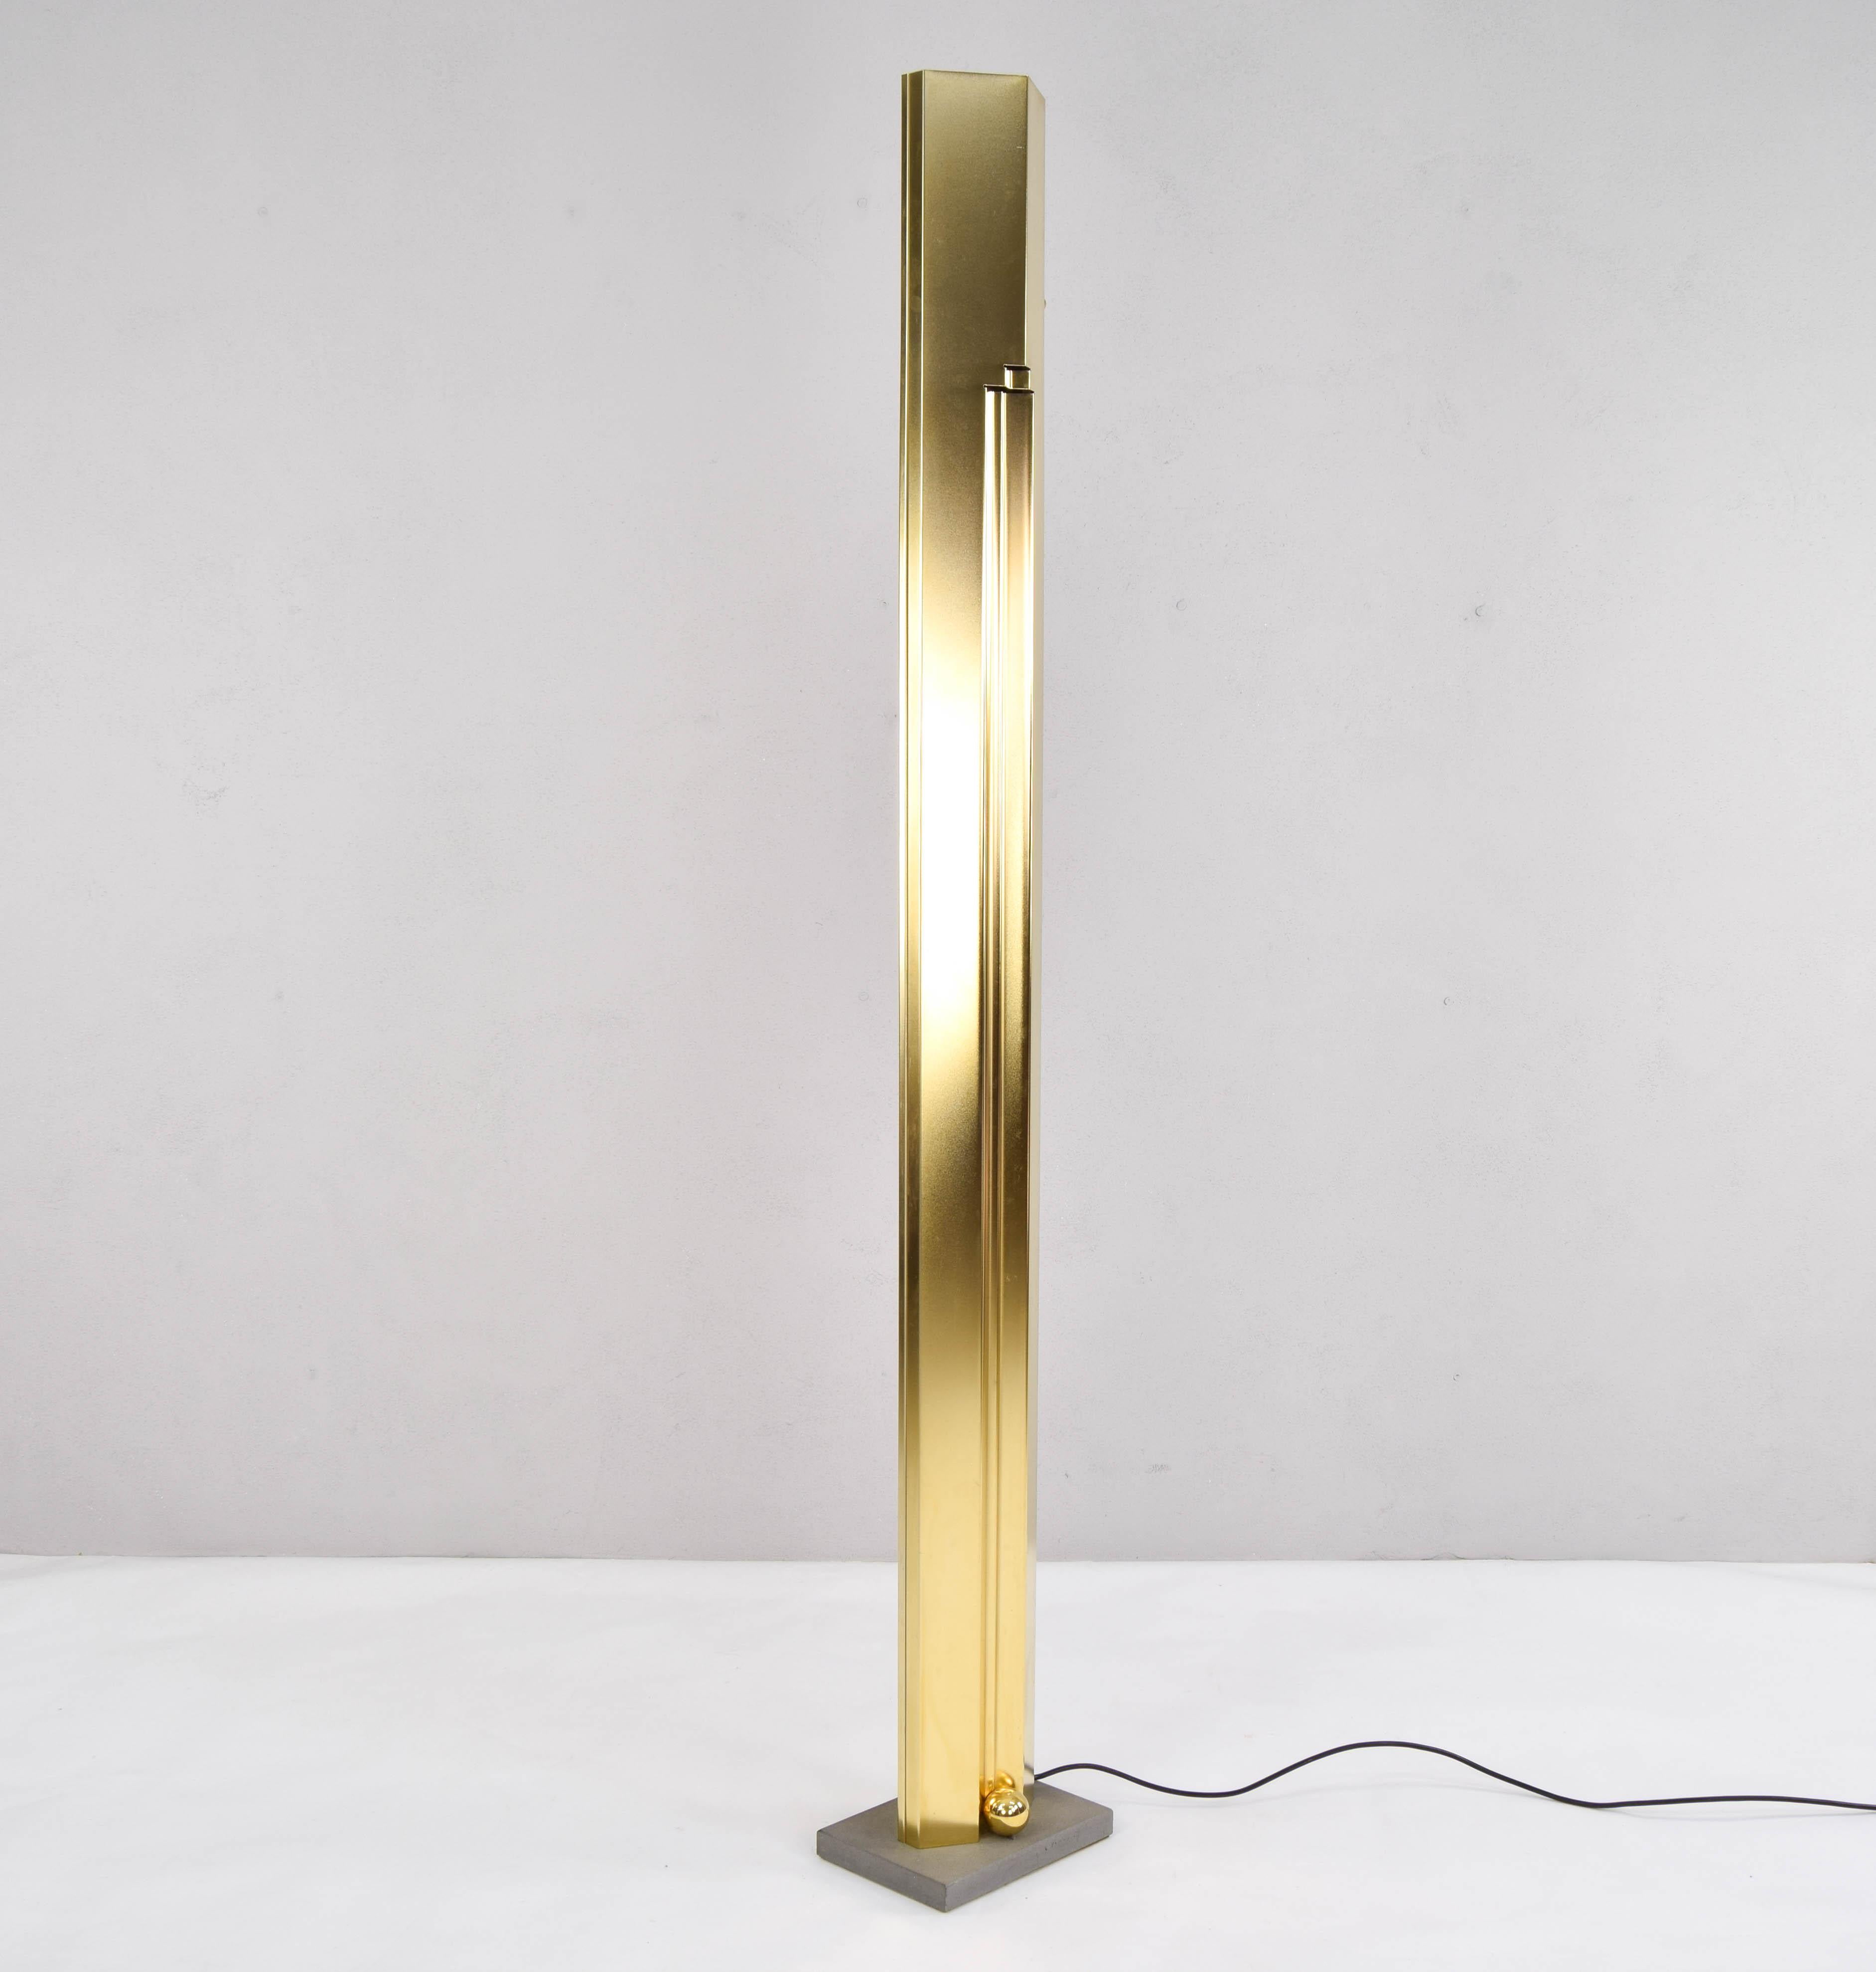 Sculptural large brass floor lamp by Kazuhide Takahama for the Italian firm Sirrah. Body of geometric shapes with detail of two balls in its sandstone base. Adjustable light intensity. Piece in its original state, the brass has some slight marks